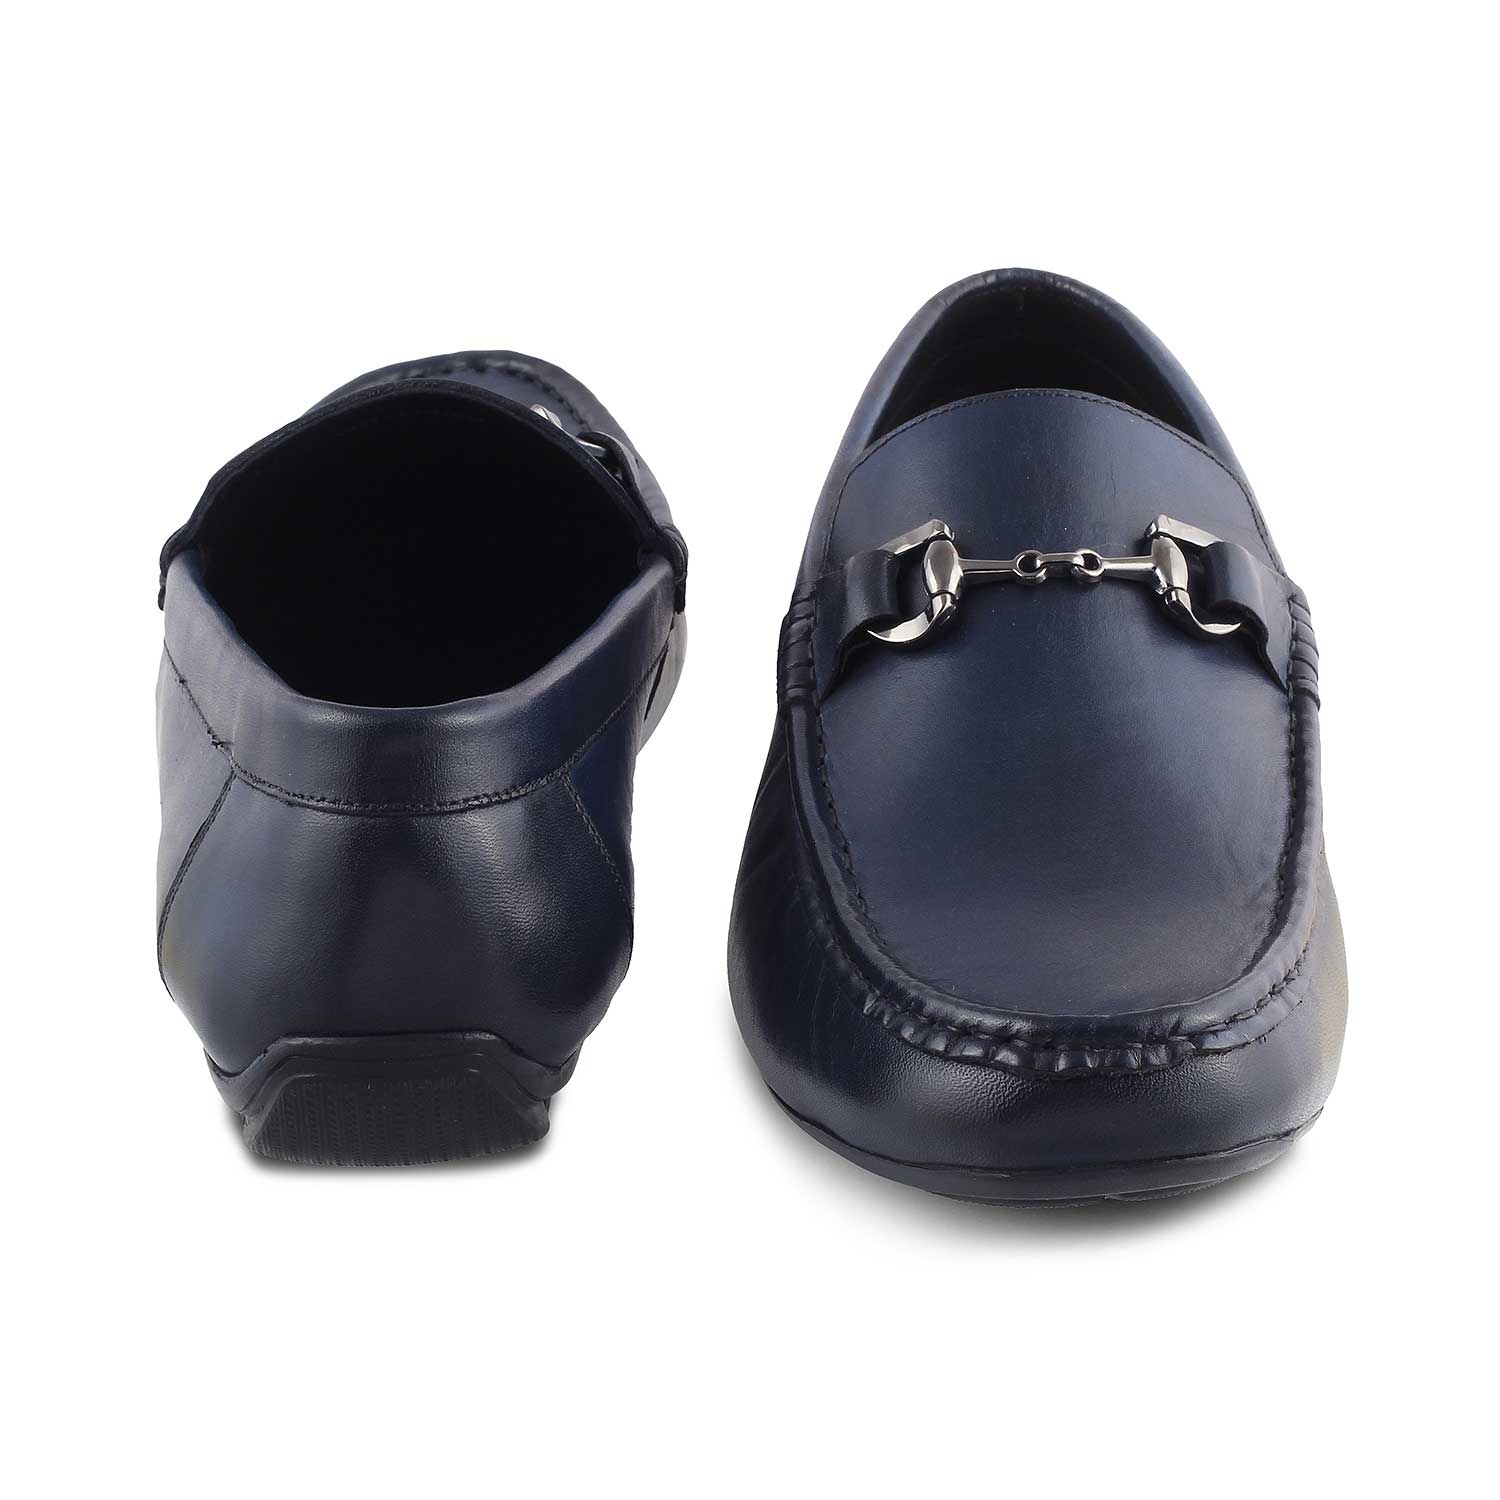 Tresmode-The Votterdam Navy Men's Leather Driving Loafers Tresmode-Tresmode